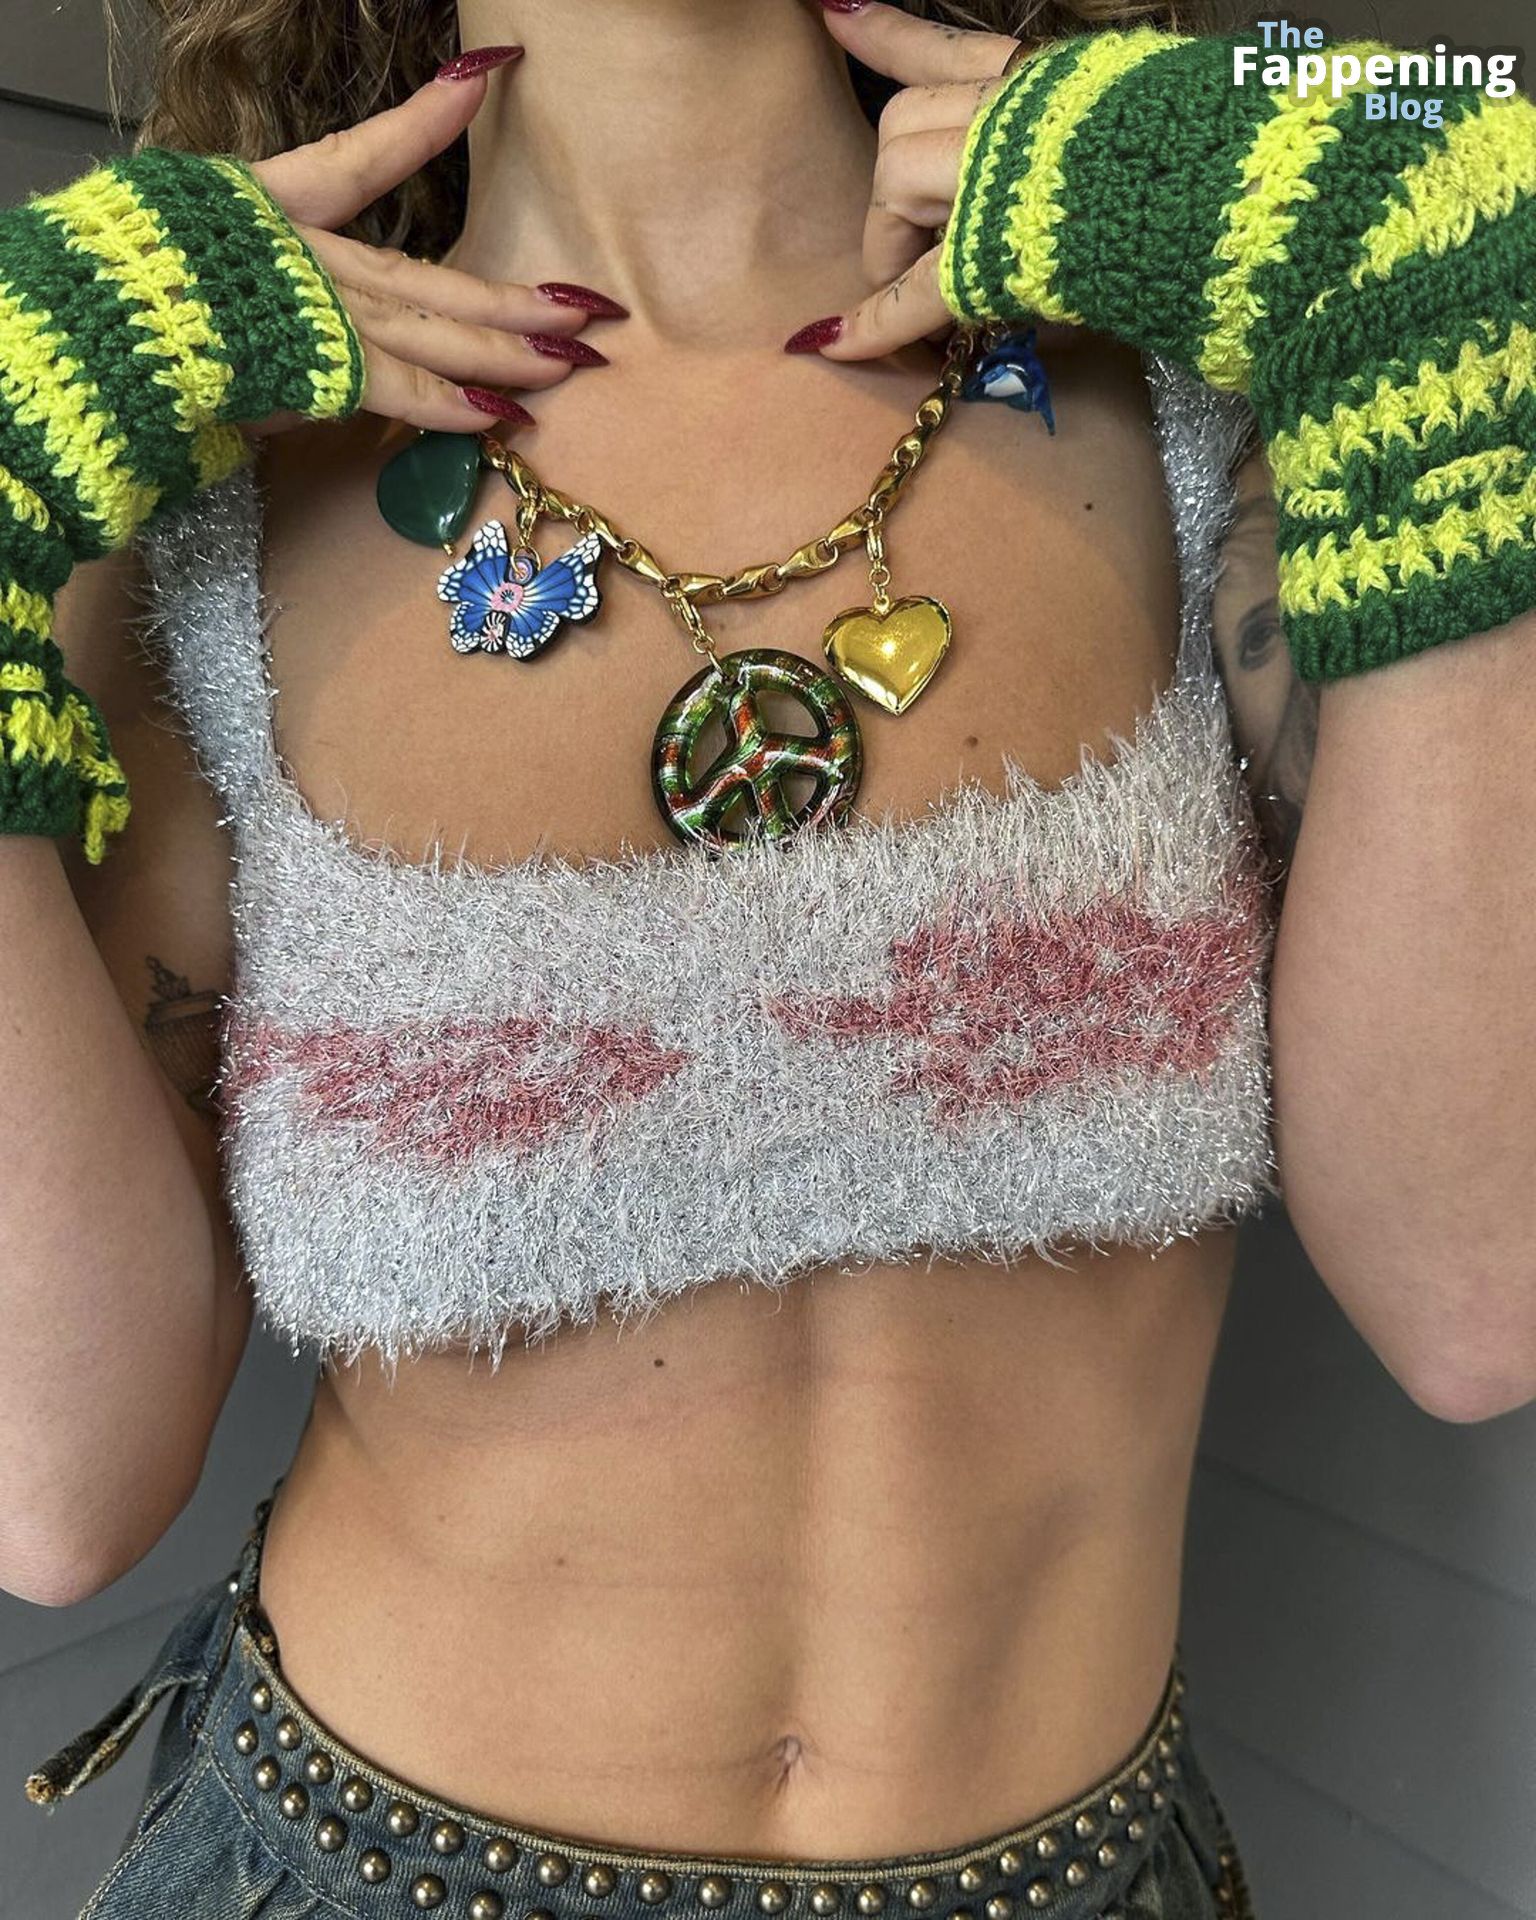 Rita Ora Flashes Her Areola and Shows Off Underboob (16 Photos)